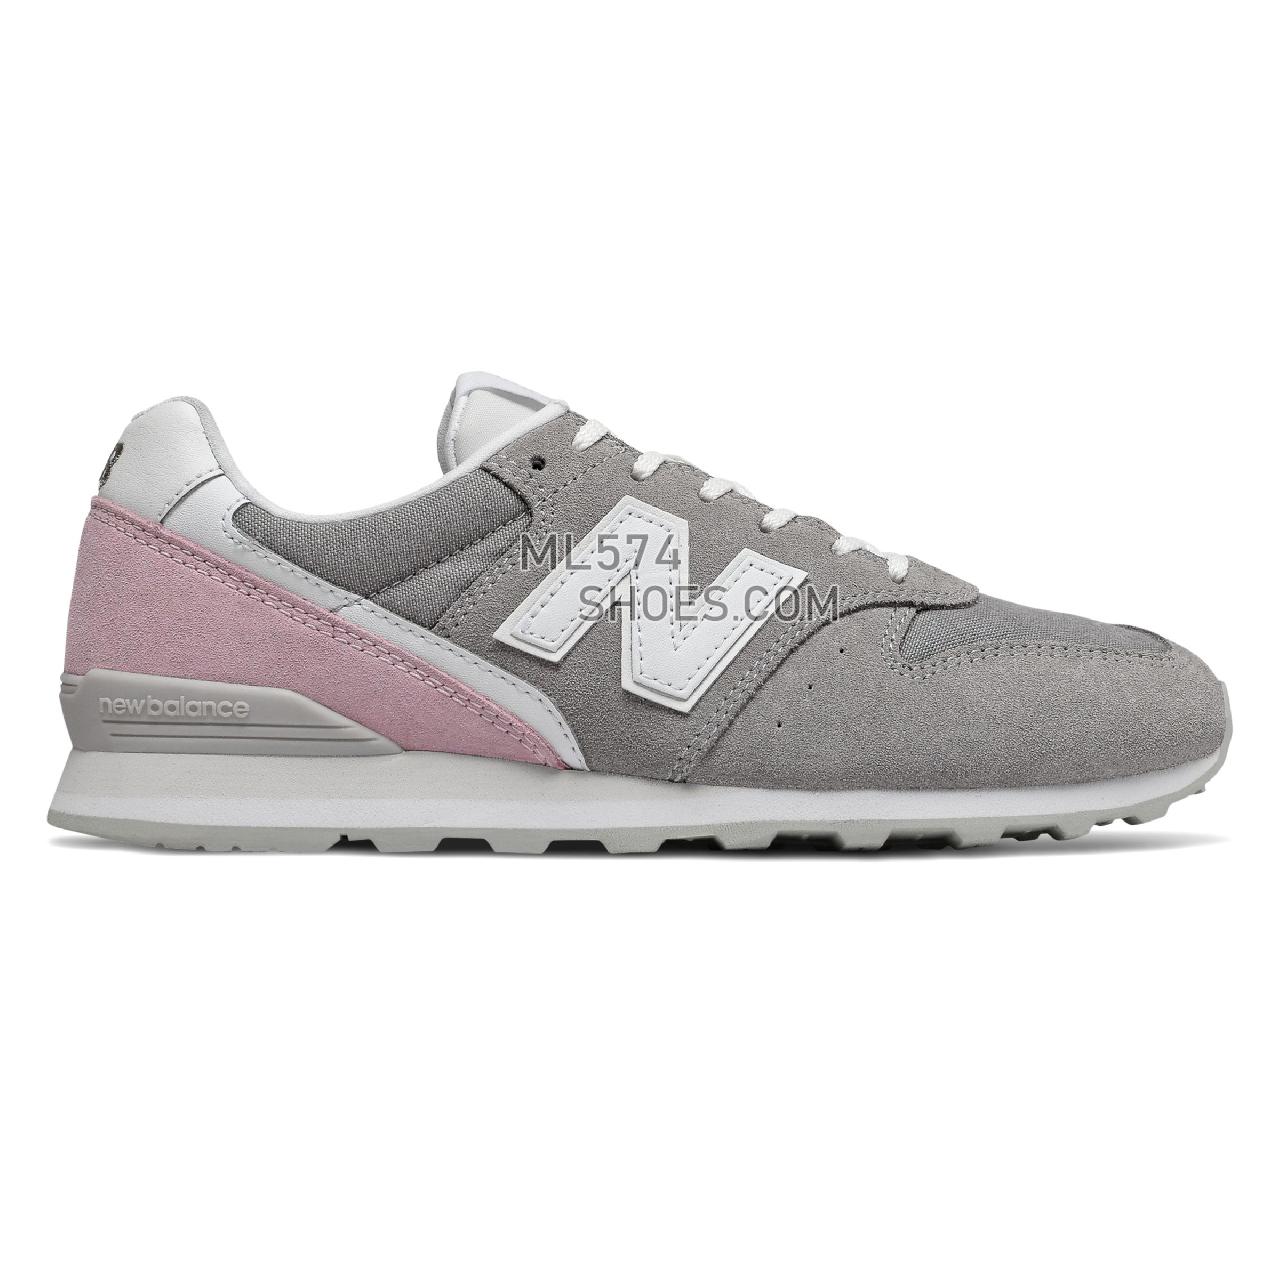 New Balance 996 - Women's Classic Sneakers - Marblehead with Oxygen Pink - WL996BC